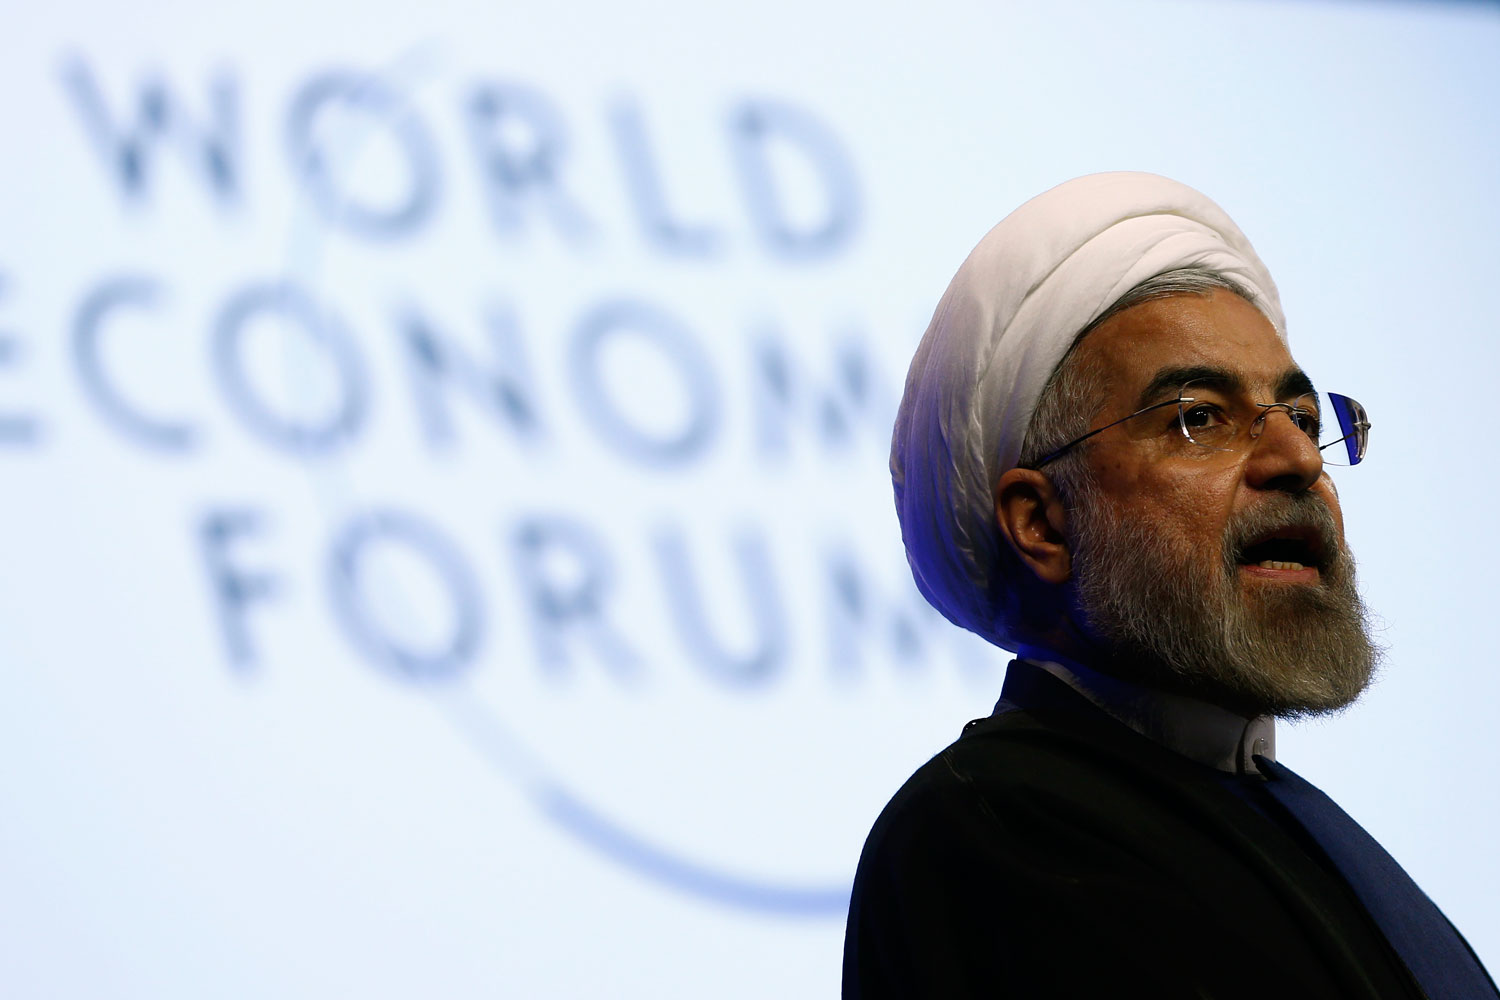 Iran's President Hassan Rouhani speaks during a session at the annual meeting of the World Economic Forum in Davos, Switzerland, on Jan. 23, 2014 (Denis Balibouse / Reuters)